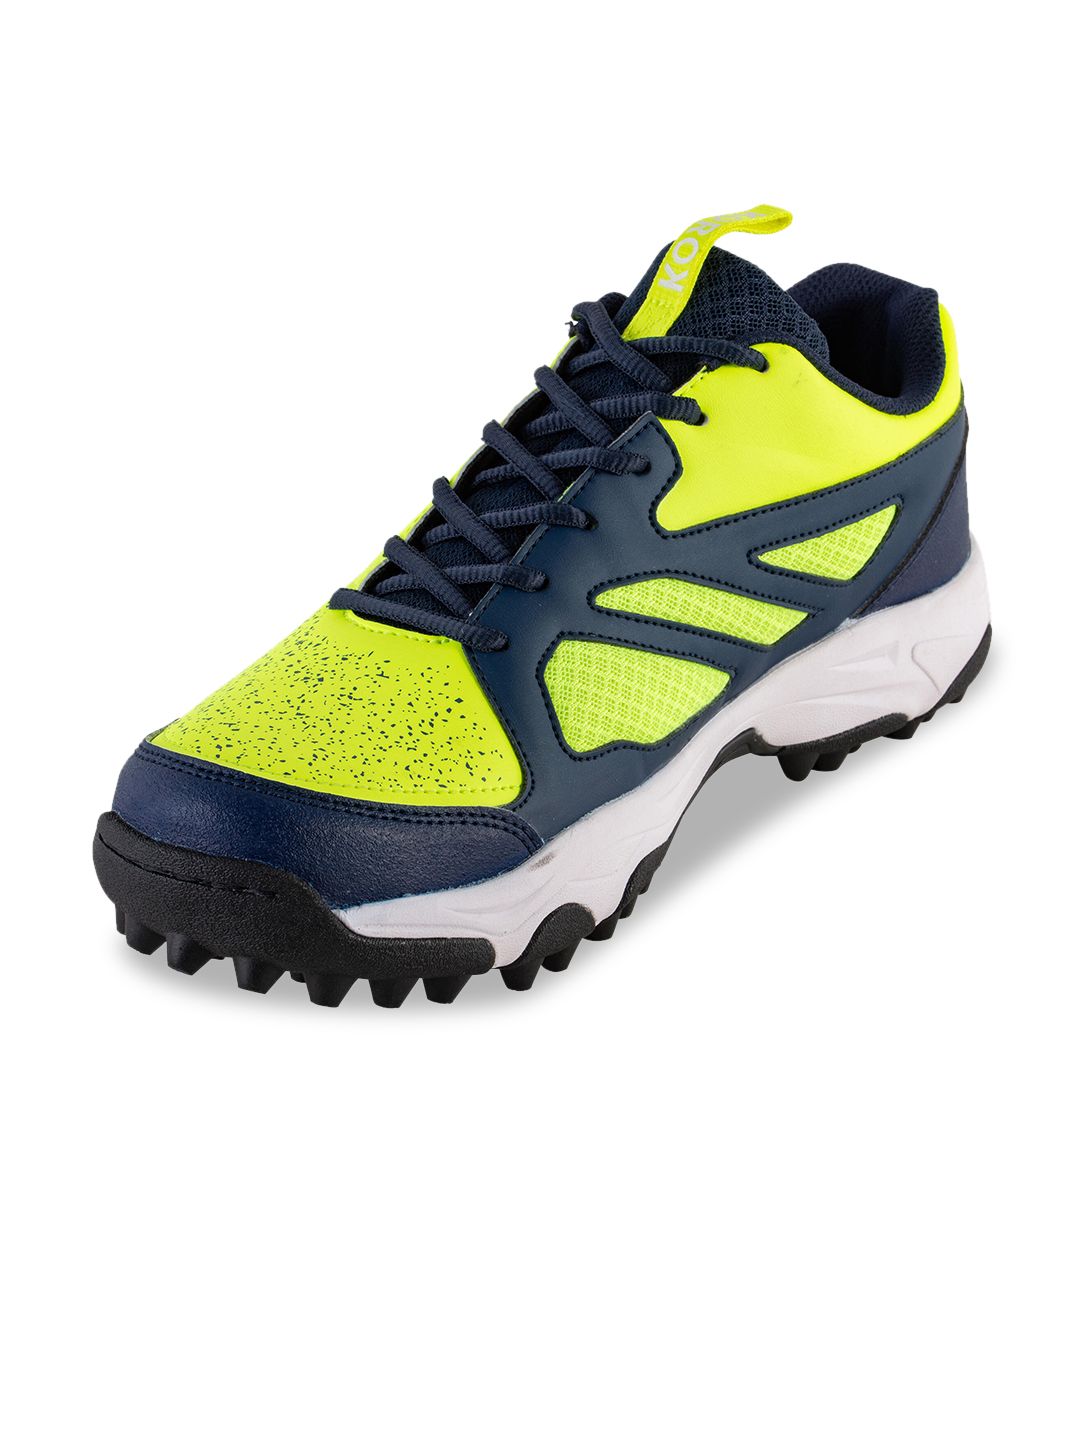 KOROK By Decathlon Unisex Yellow Low Intensity Field Hockey Shoes Price in India